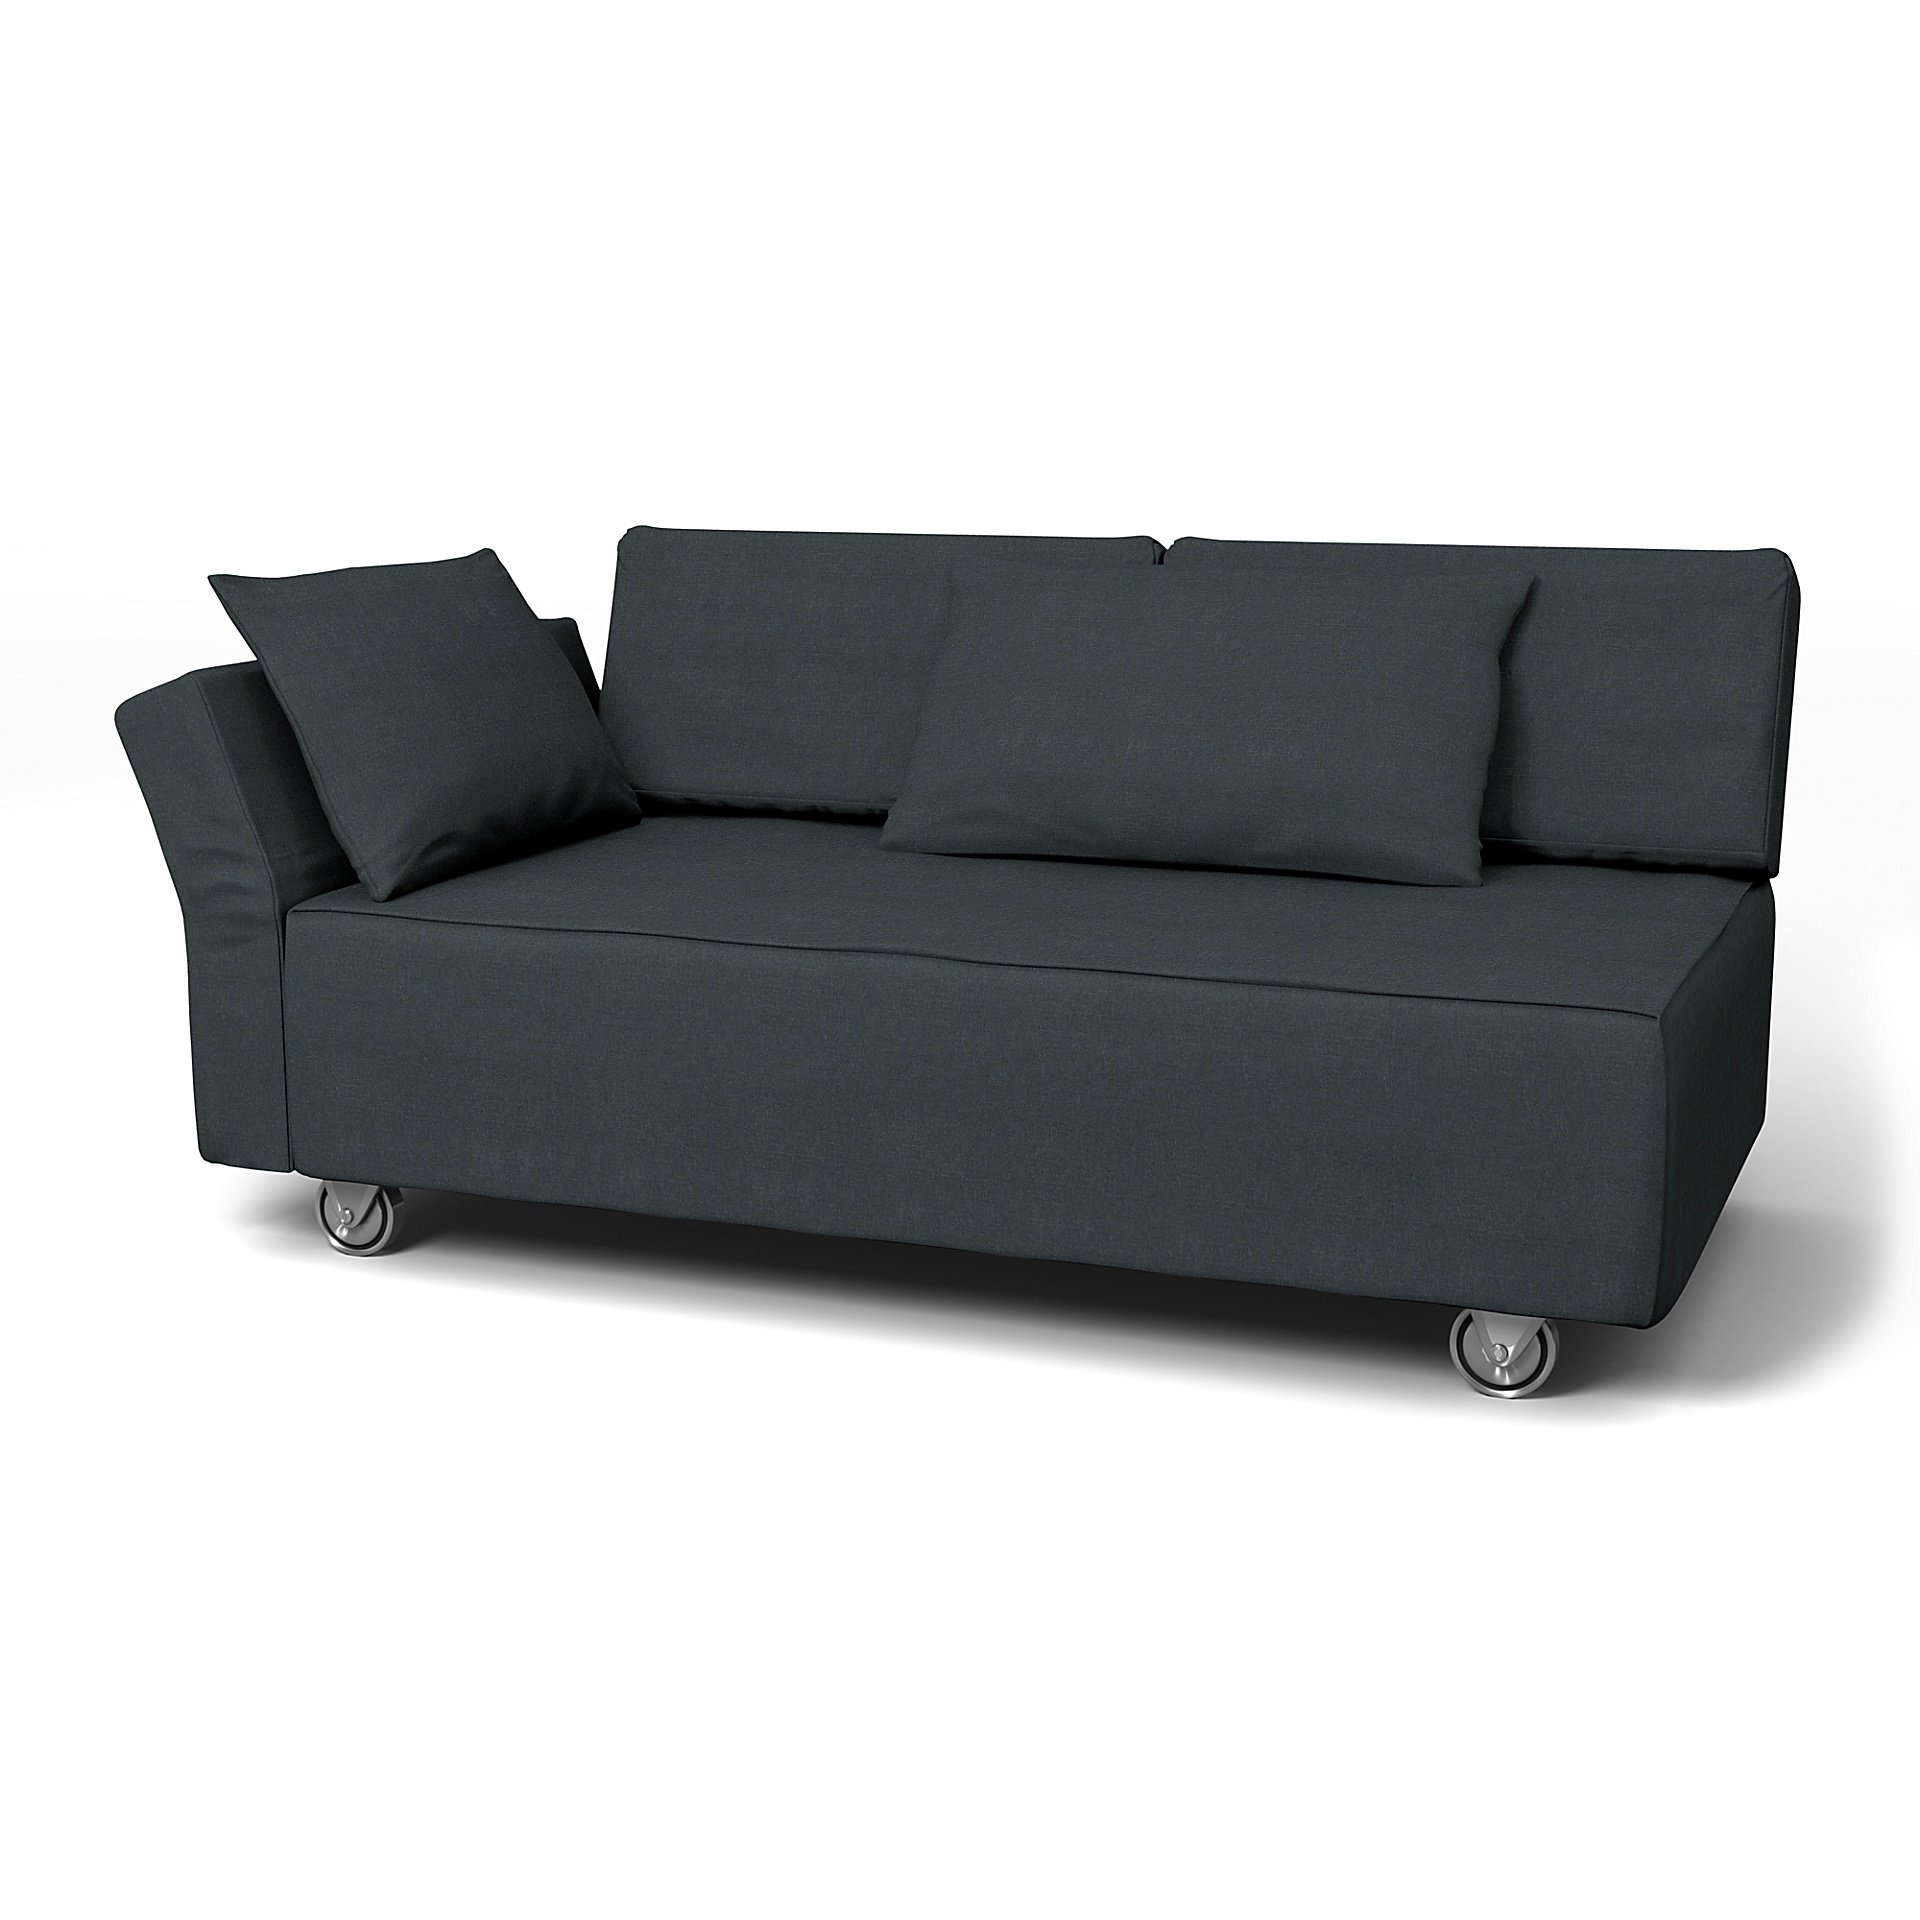 IKEA - Falsterbo 2 Seat Sofa with Left Arm Cover, Graphite Grey, Linen - Bemz